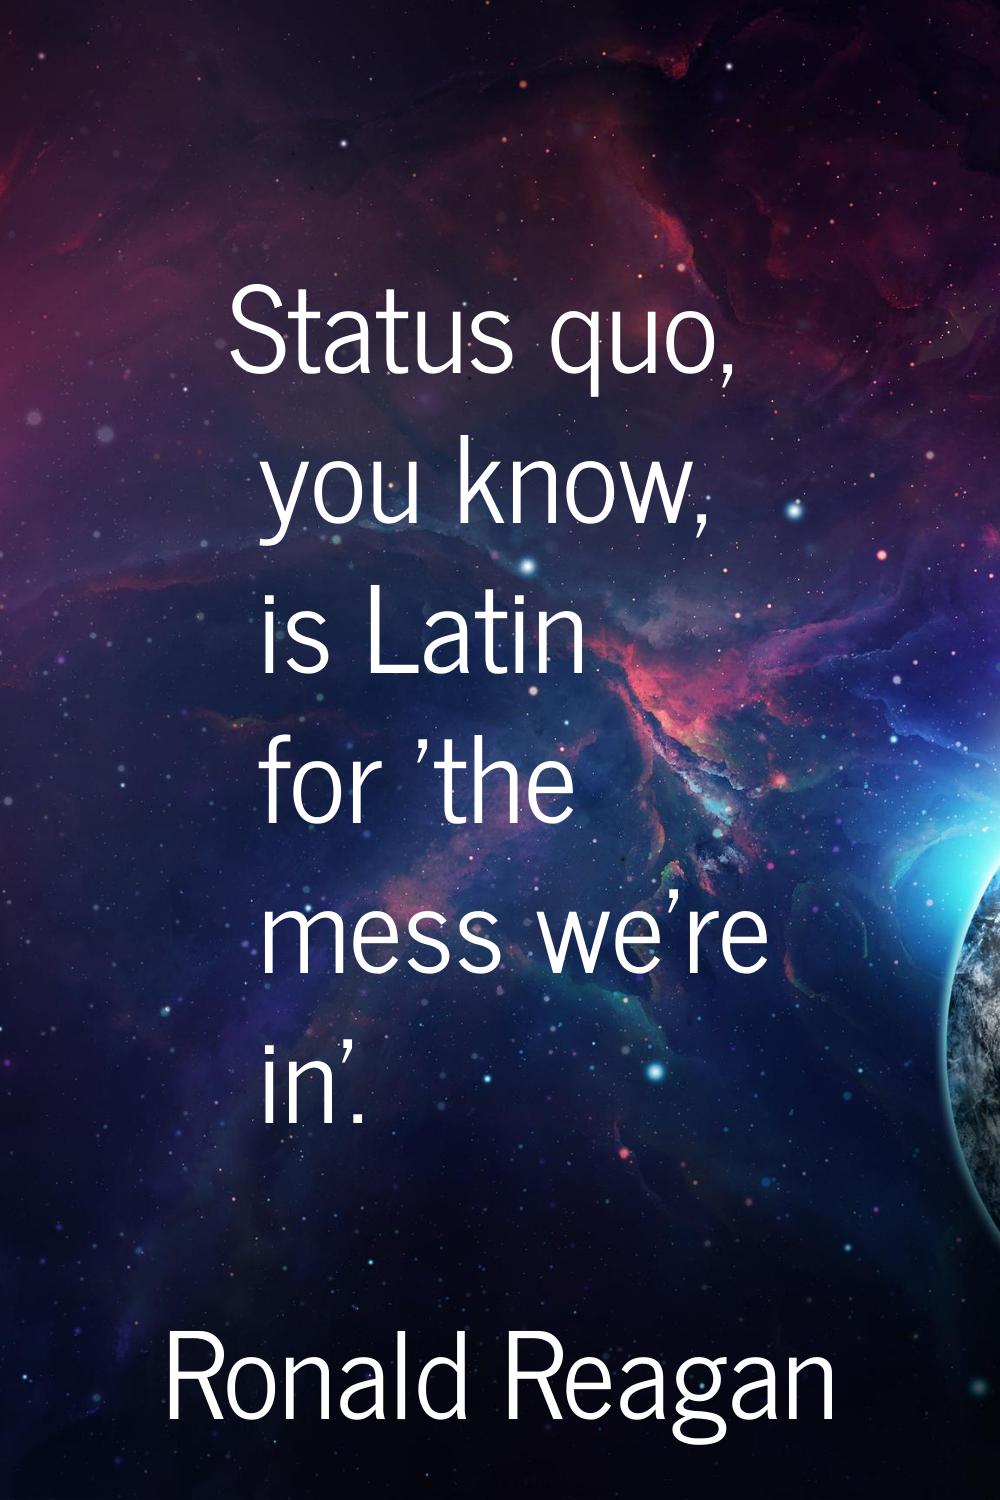 Status quo, you know, is Latin for 'the mess we're in'.